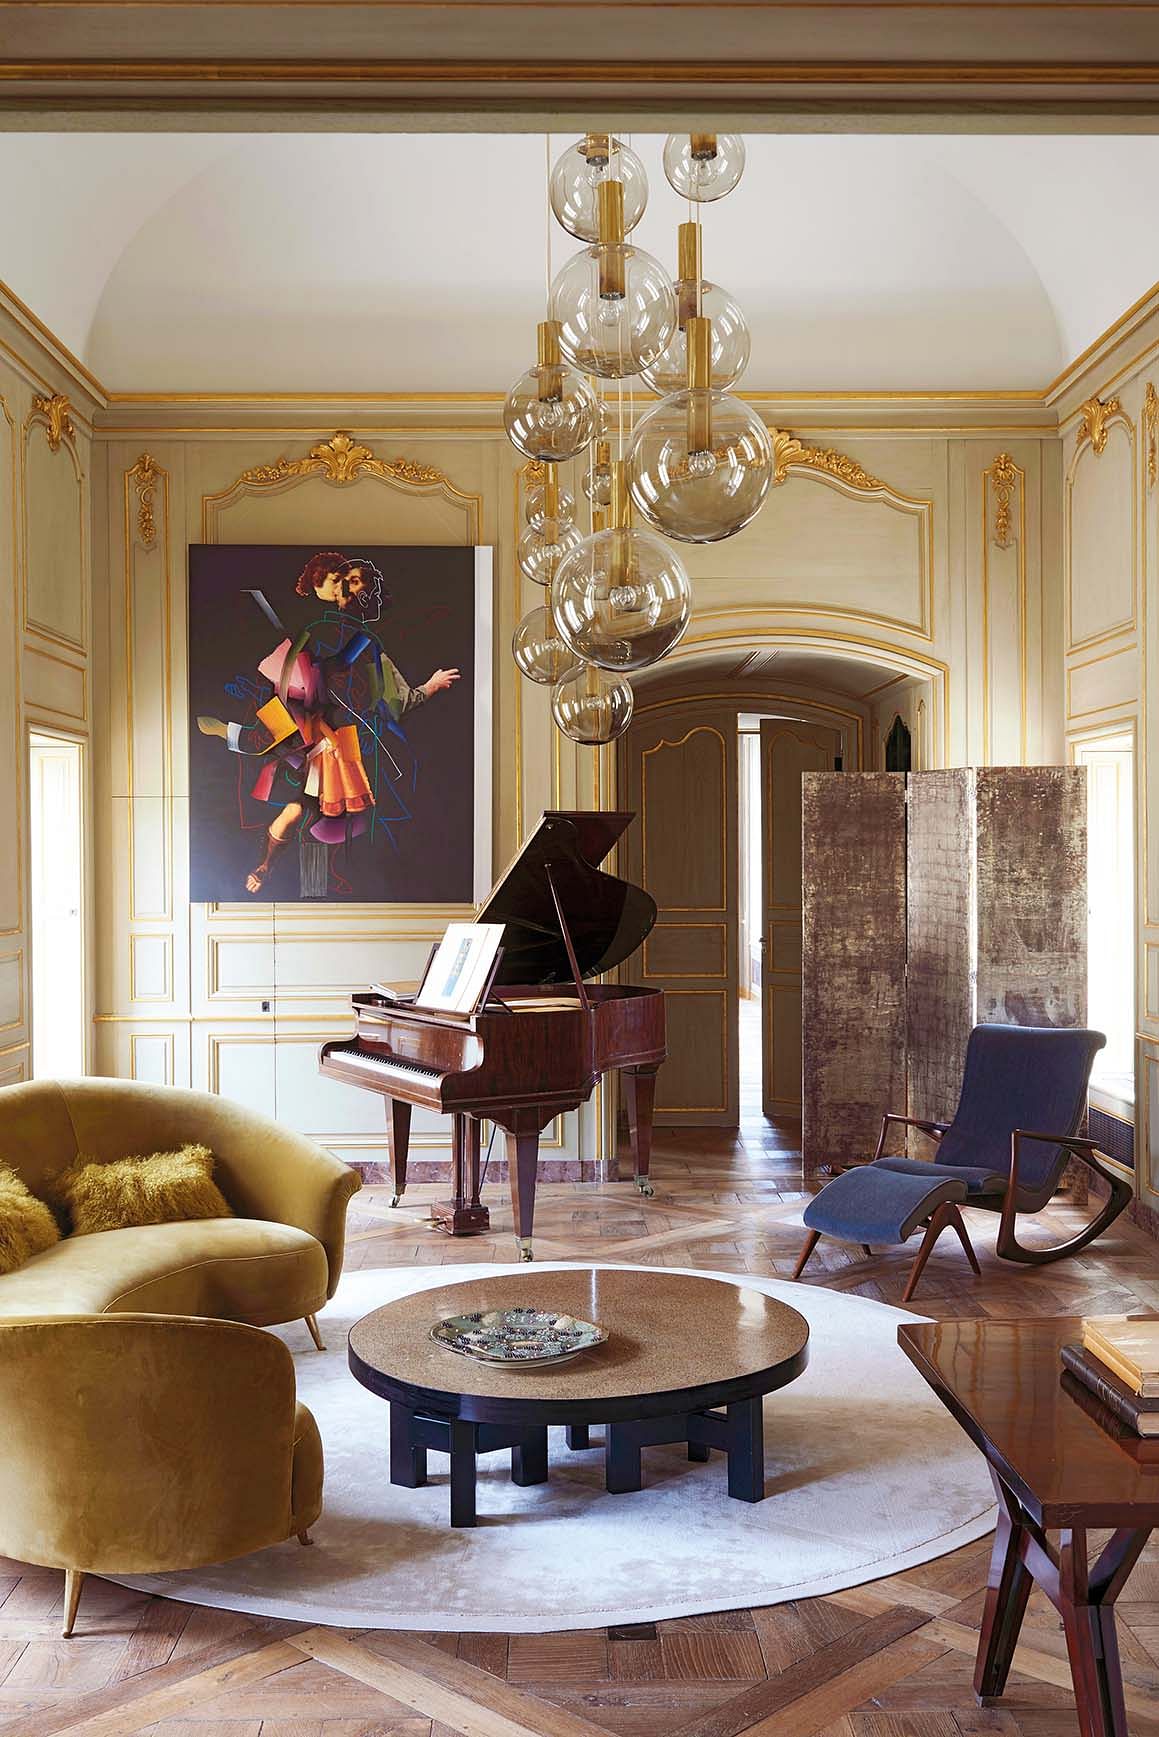 The living area features a 19th century Grand Erard piano and Versailles parquet; a bespoke screen in lacquered white gold created by Atelier Maury, and a Grain de poivre coffee table by Ado Chale. The painting “Shadow of Past” is by Pieter Schoolwerth (from Galerie Nathalie Obadia).